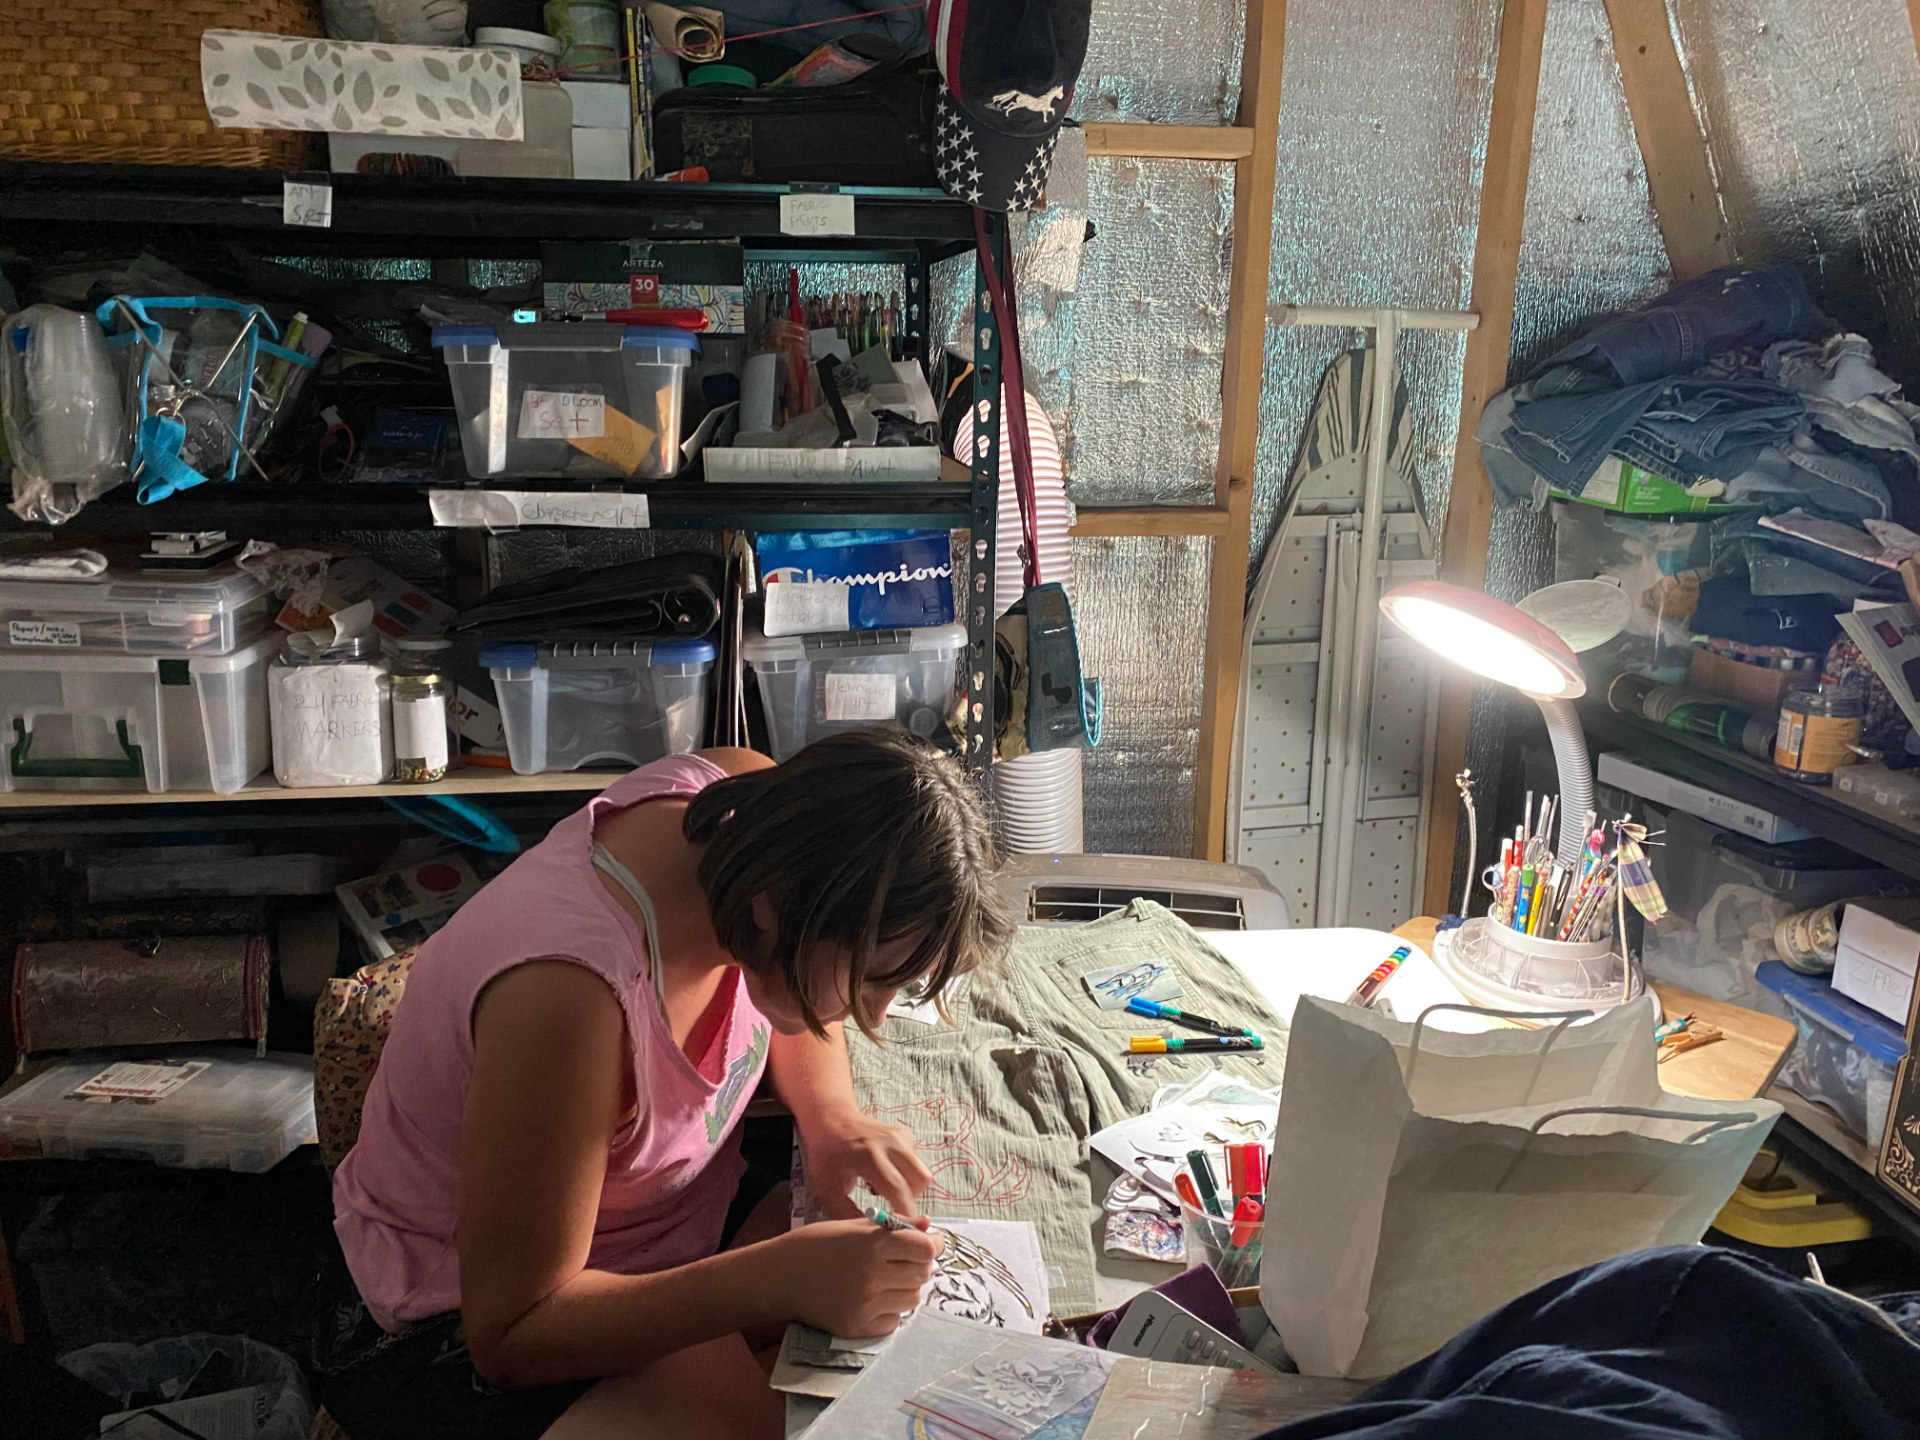 A woman bends over some crafting work in a shed, with a lamp hovering over her work.